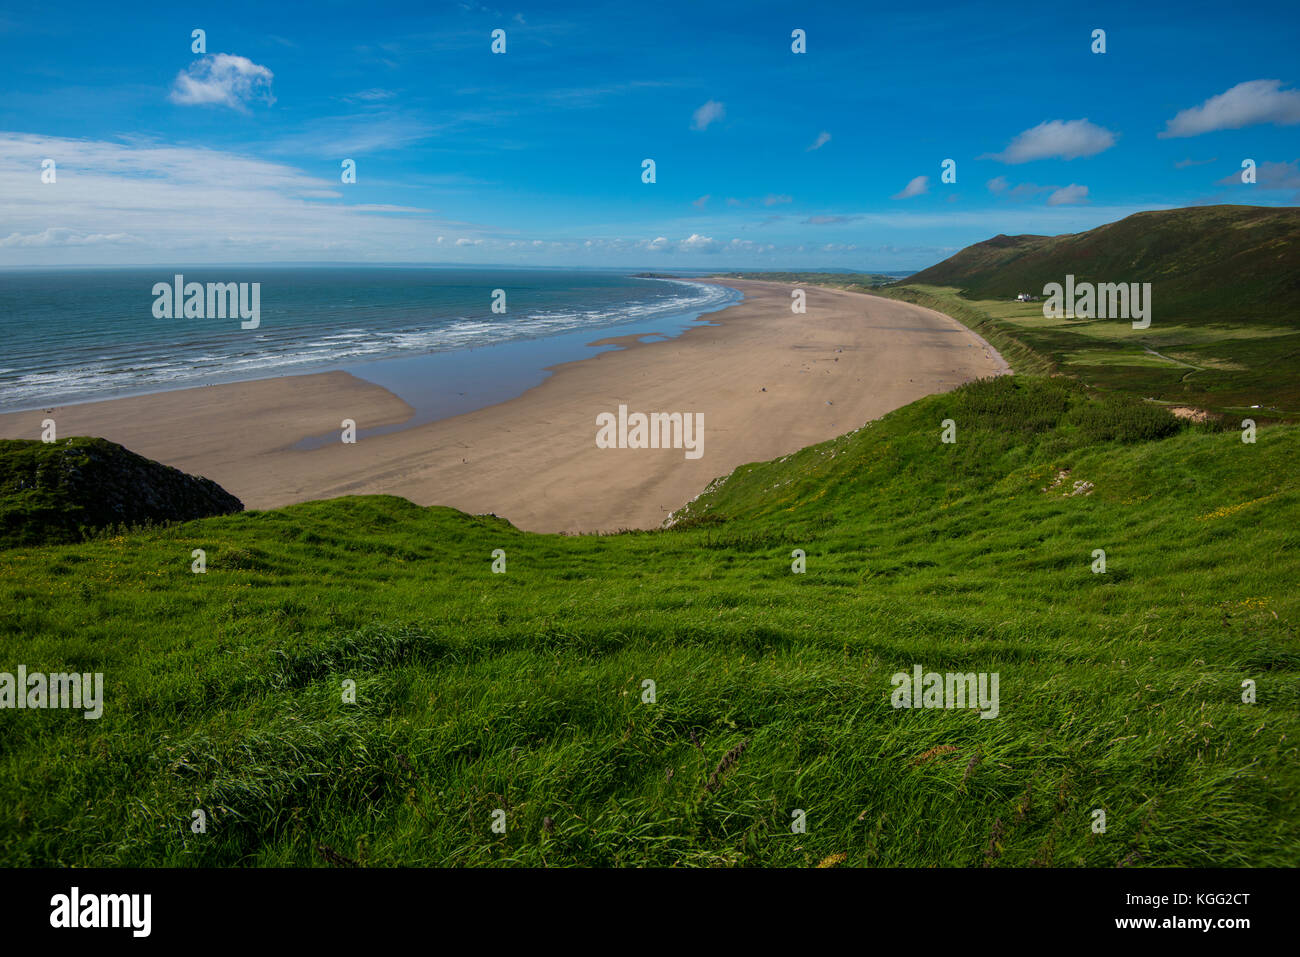 Gower, Wales. The beauty of the coast with Rhossili Beach and The Worm's Head. A natural paradise that it would be hard to beat. Great vistas. Stock Photo